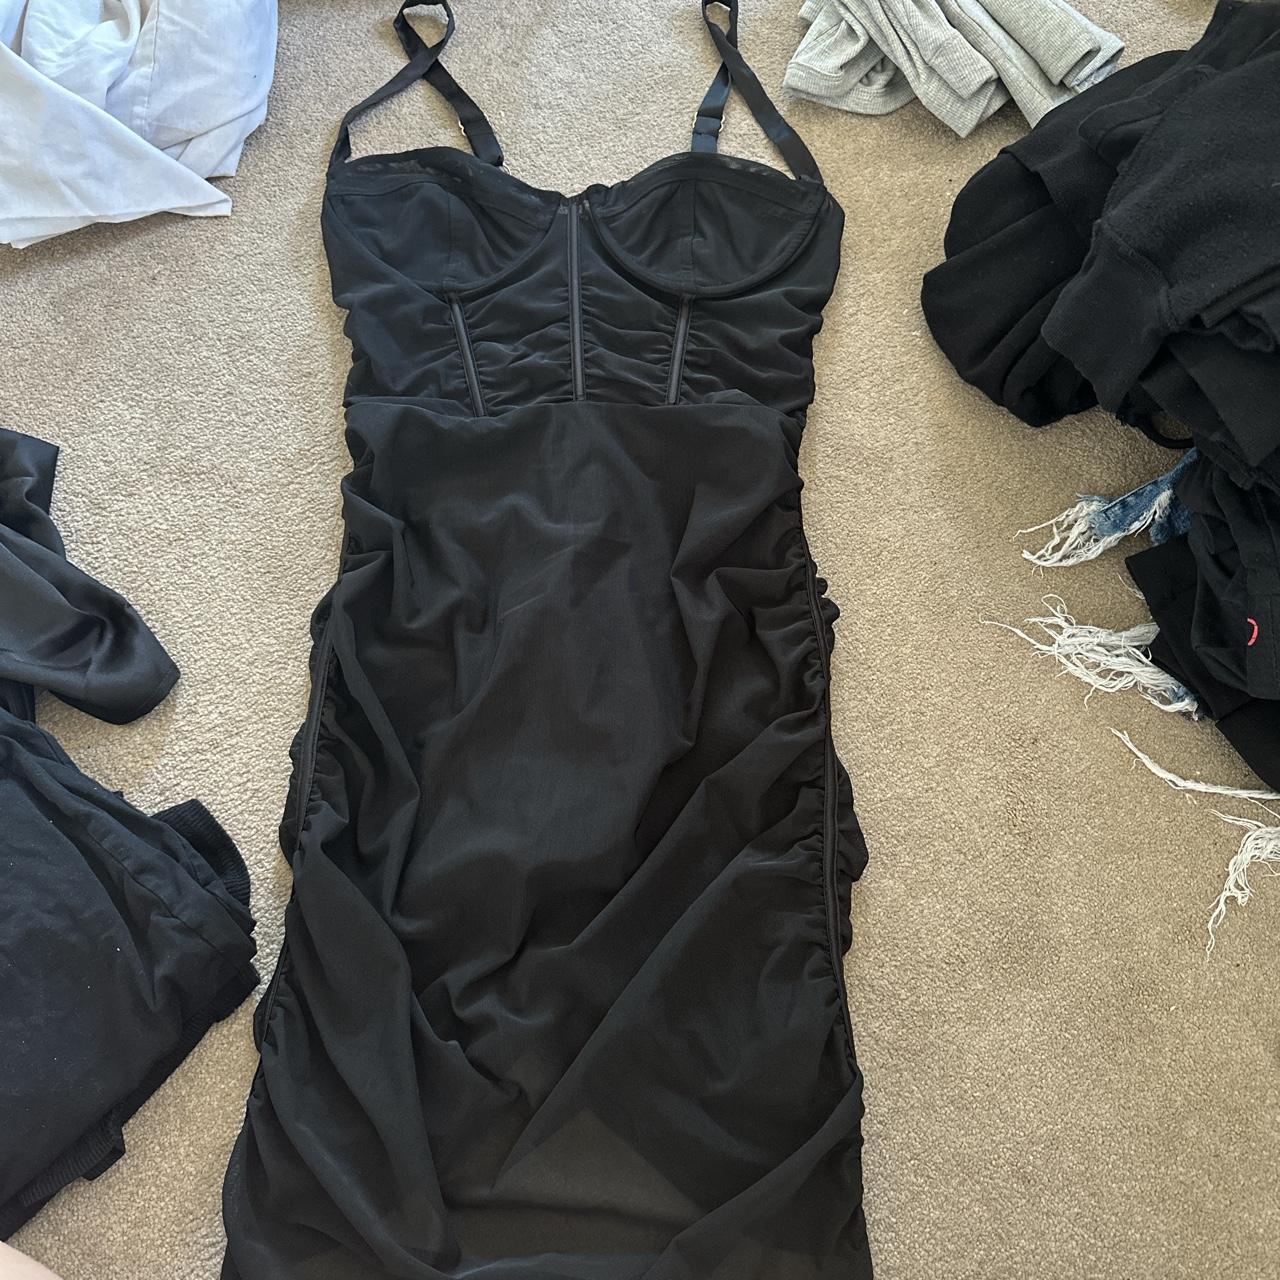 Sheer oh polly black dress- never worn Good for a... - Depop